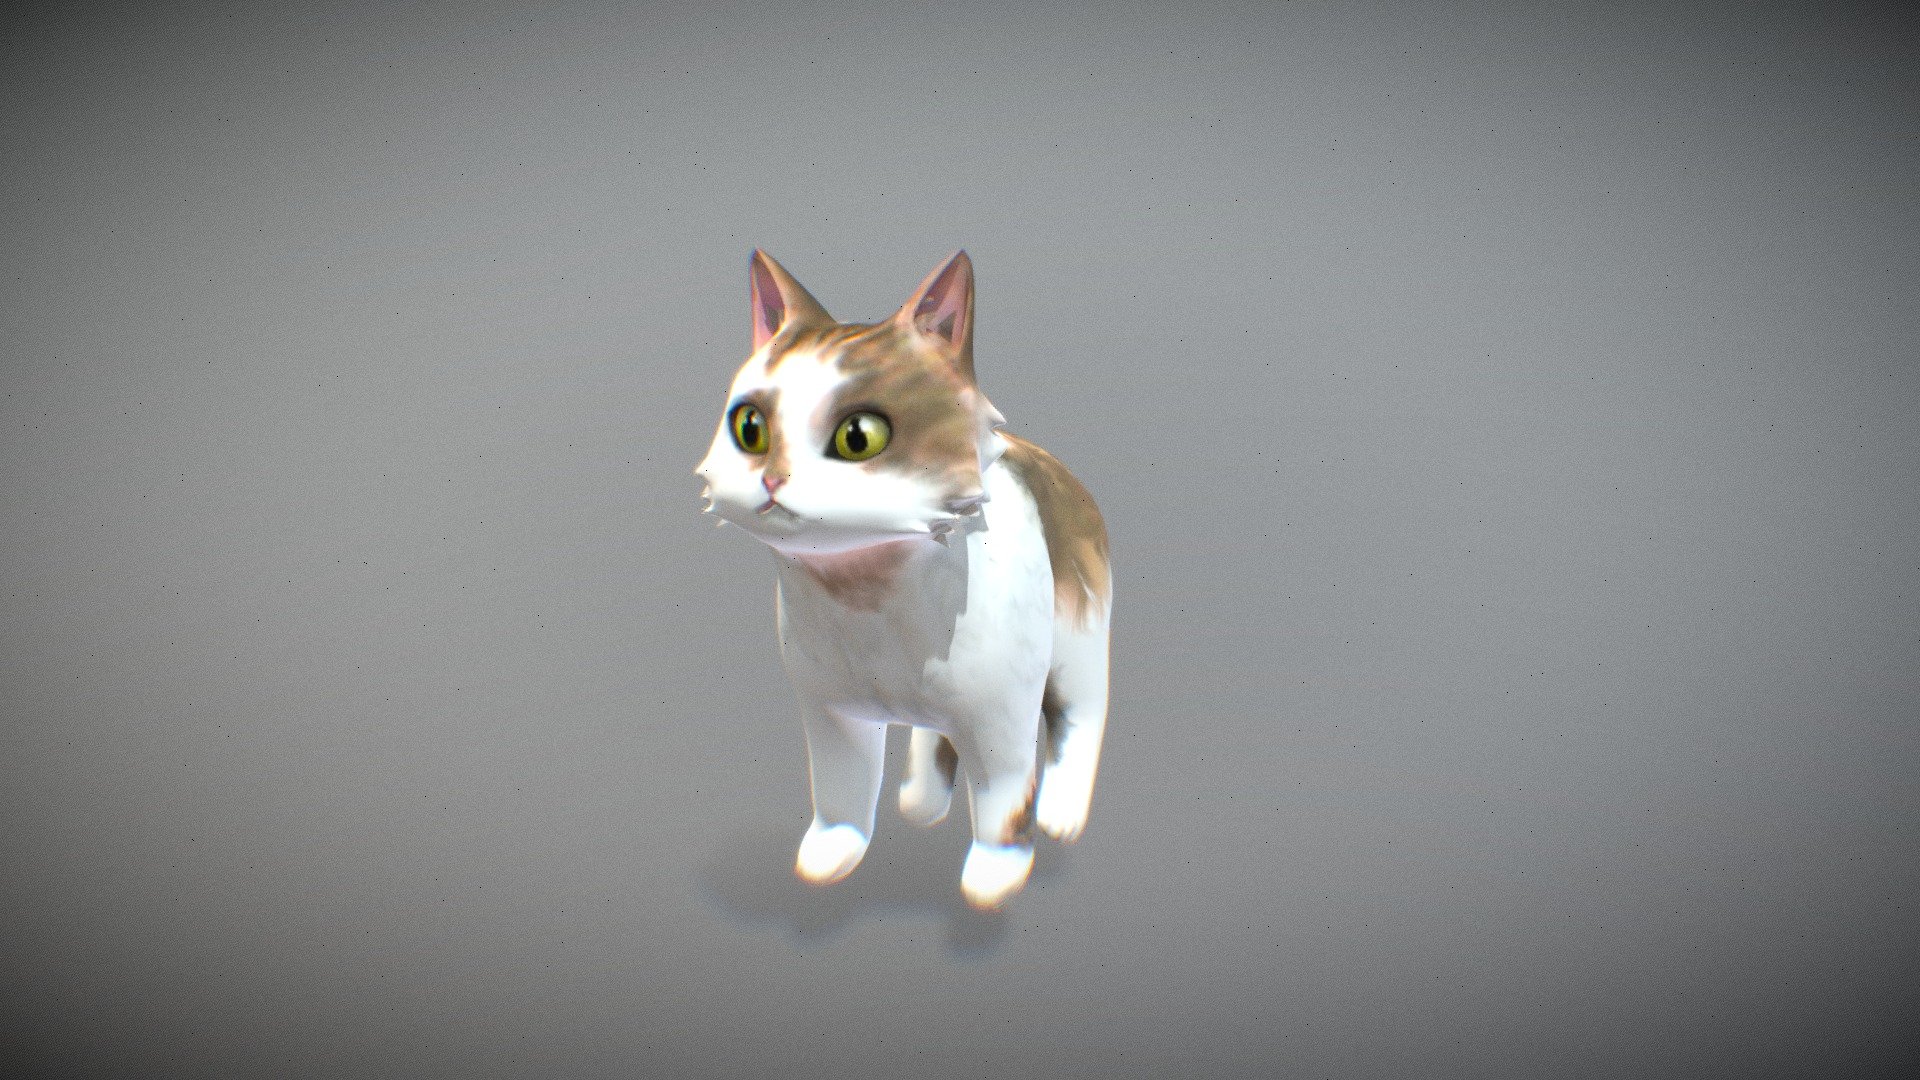 3D character with rigg, basic animations and stylized texture for a mobile game project.

Also check my other networks here:
https://www.instagram.com/meaap.art/

https://www.artstation.com/meaaapart - Cat - animated character - 3D model by Meaaap 3d model